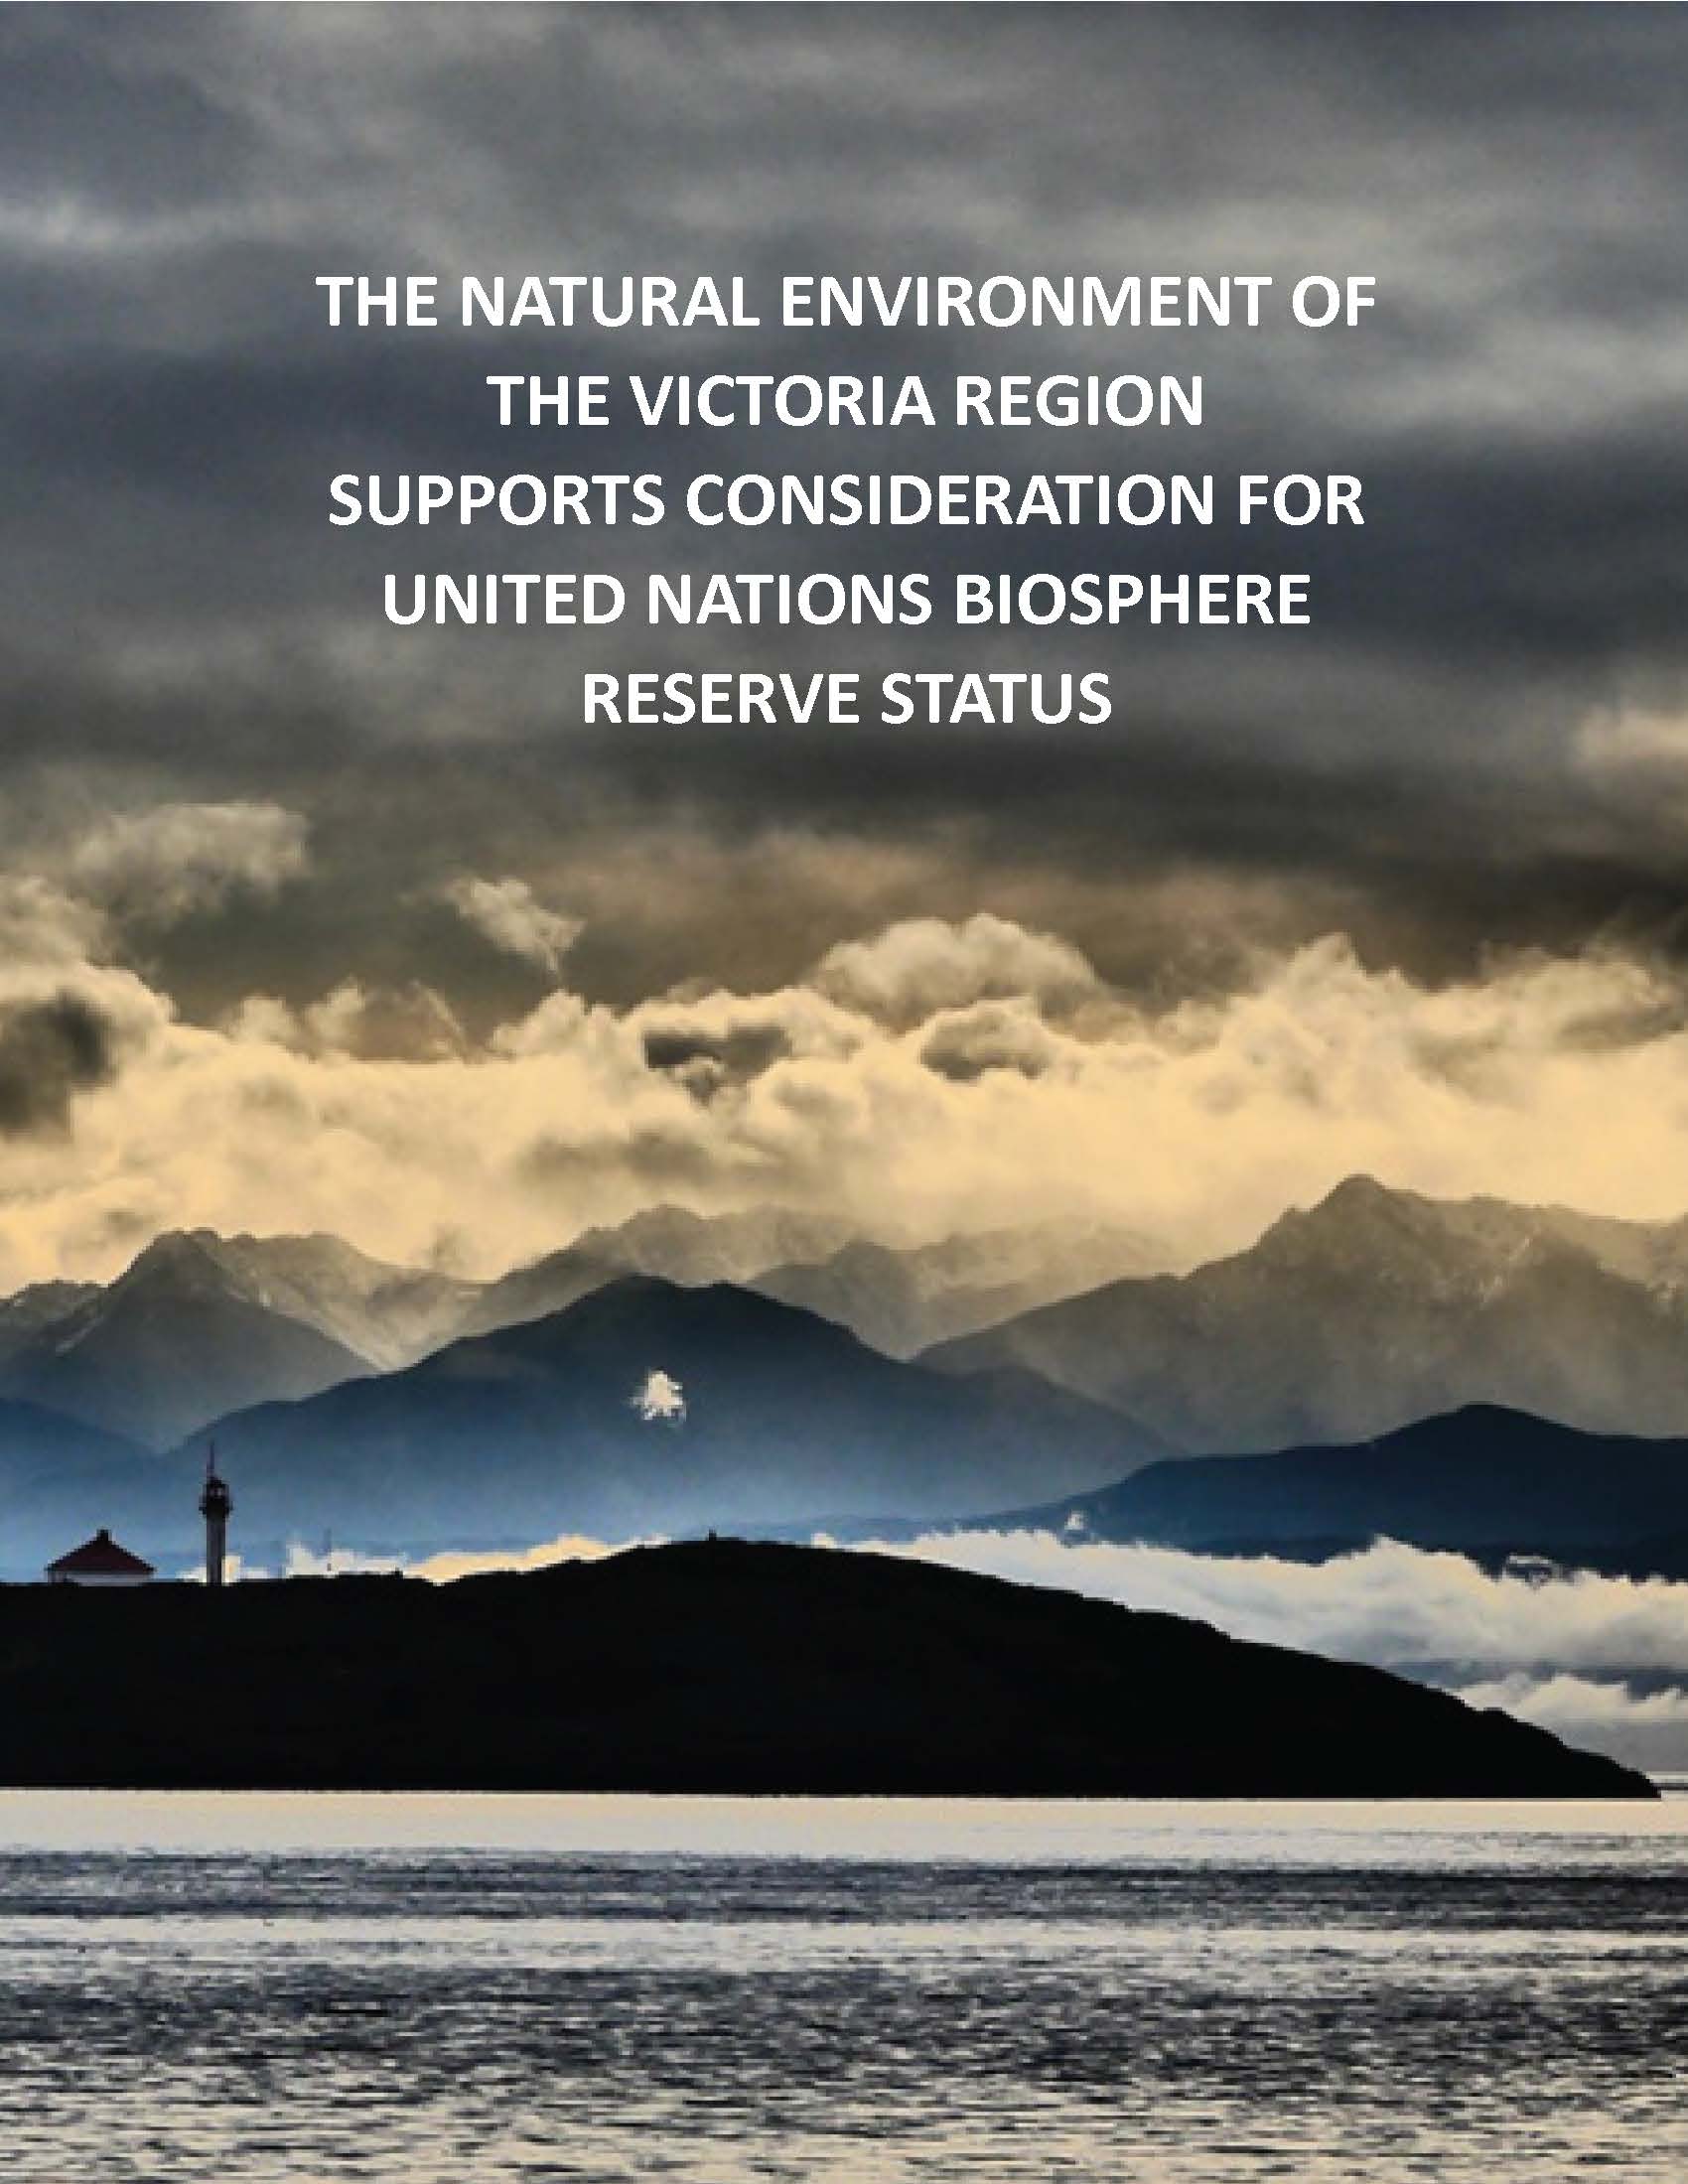 The ocean, with mountains and clouds in the background, is pictured on the cover page of Brief #45. Title: 'The Natural Environment of the Victoria Region Supports Consideration for United Nations Biosphere Reserve Status.'